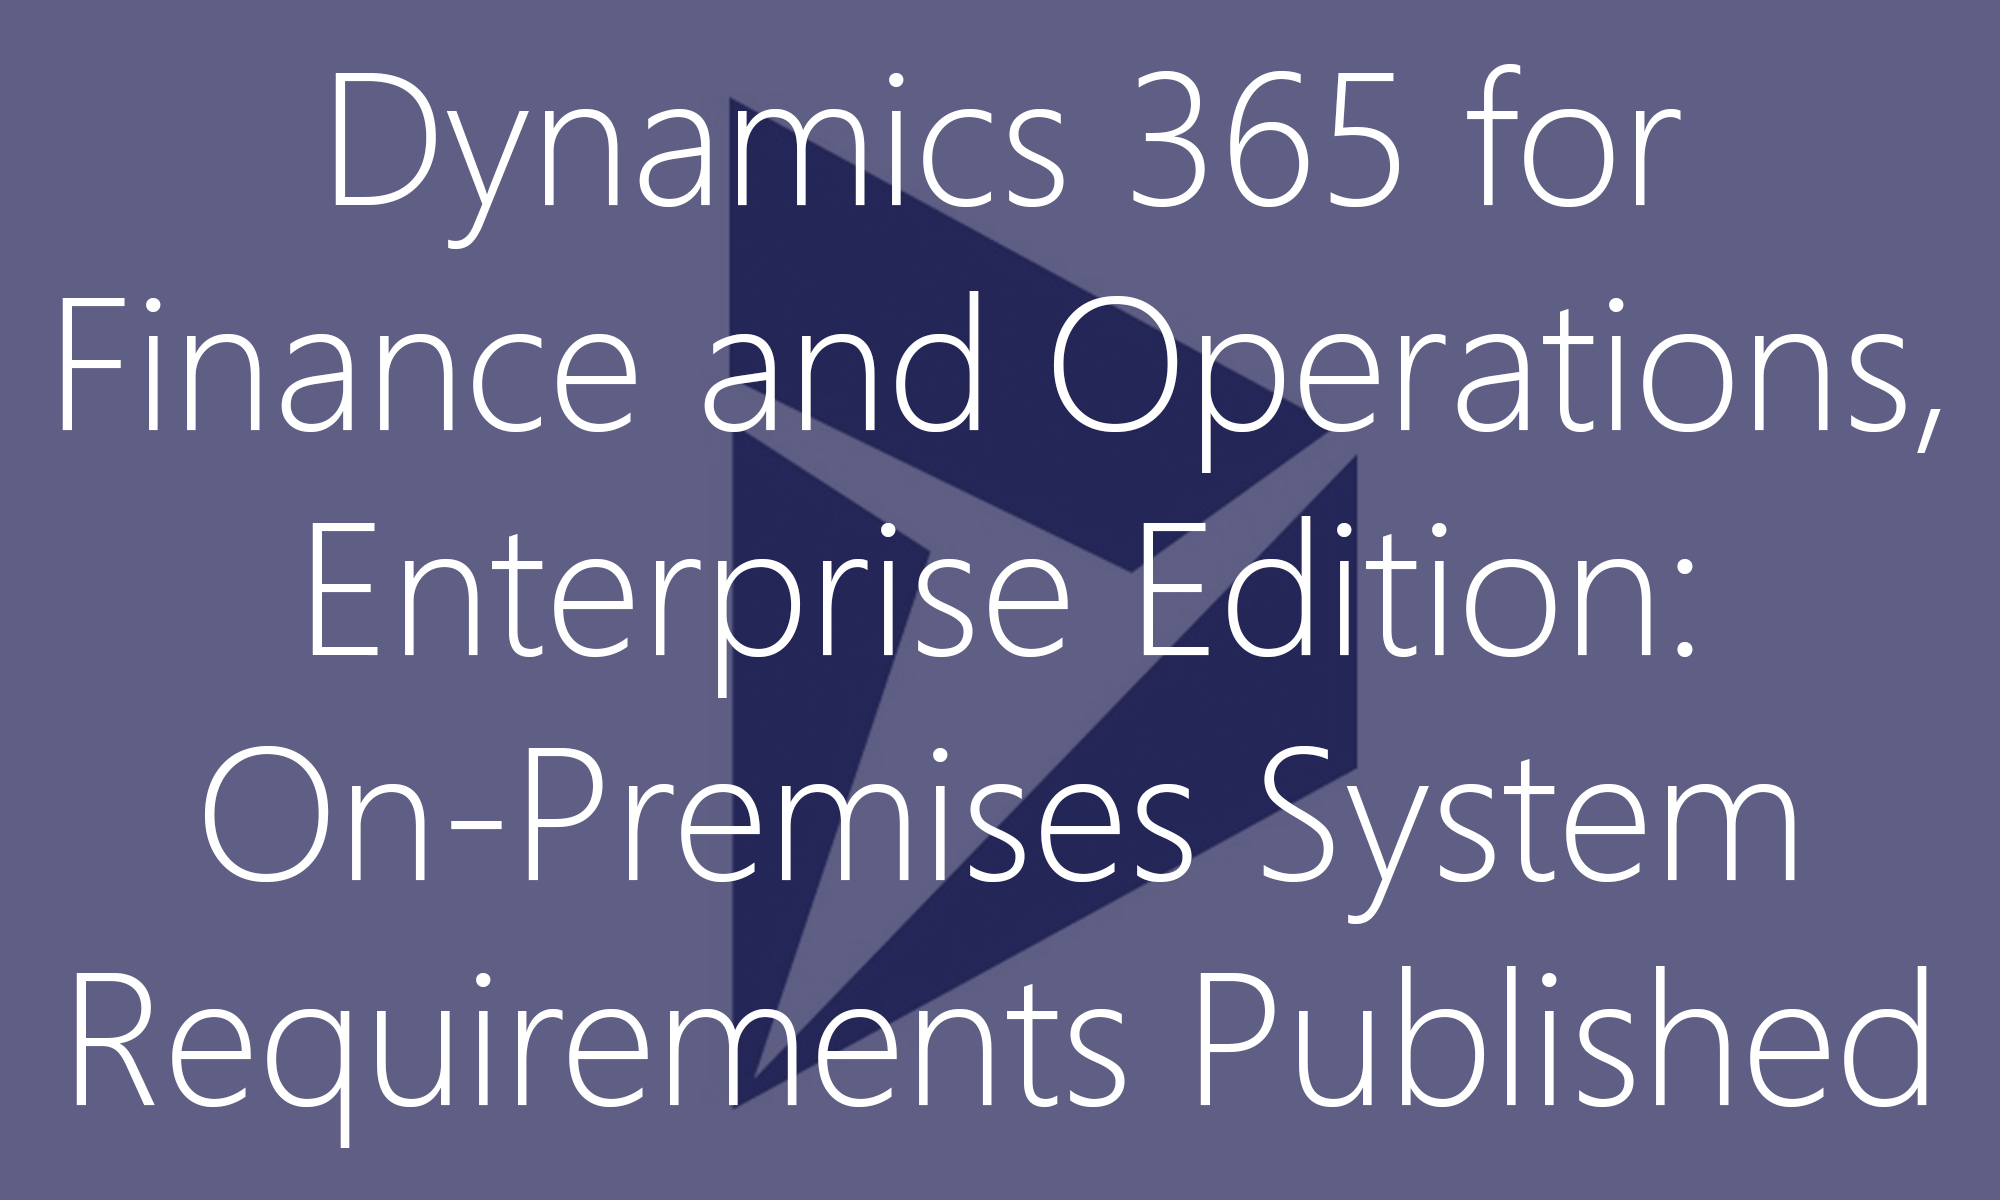 Dynamics 365 for Finance and Operations, Enterprise Edition: On-Premises System Requirements Published